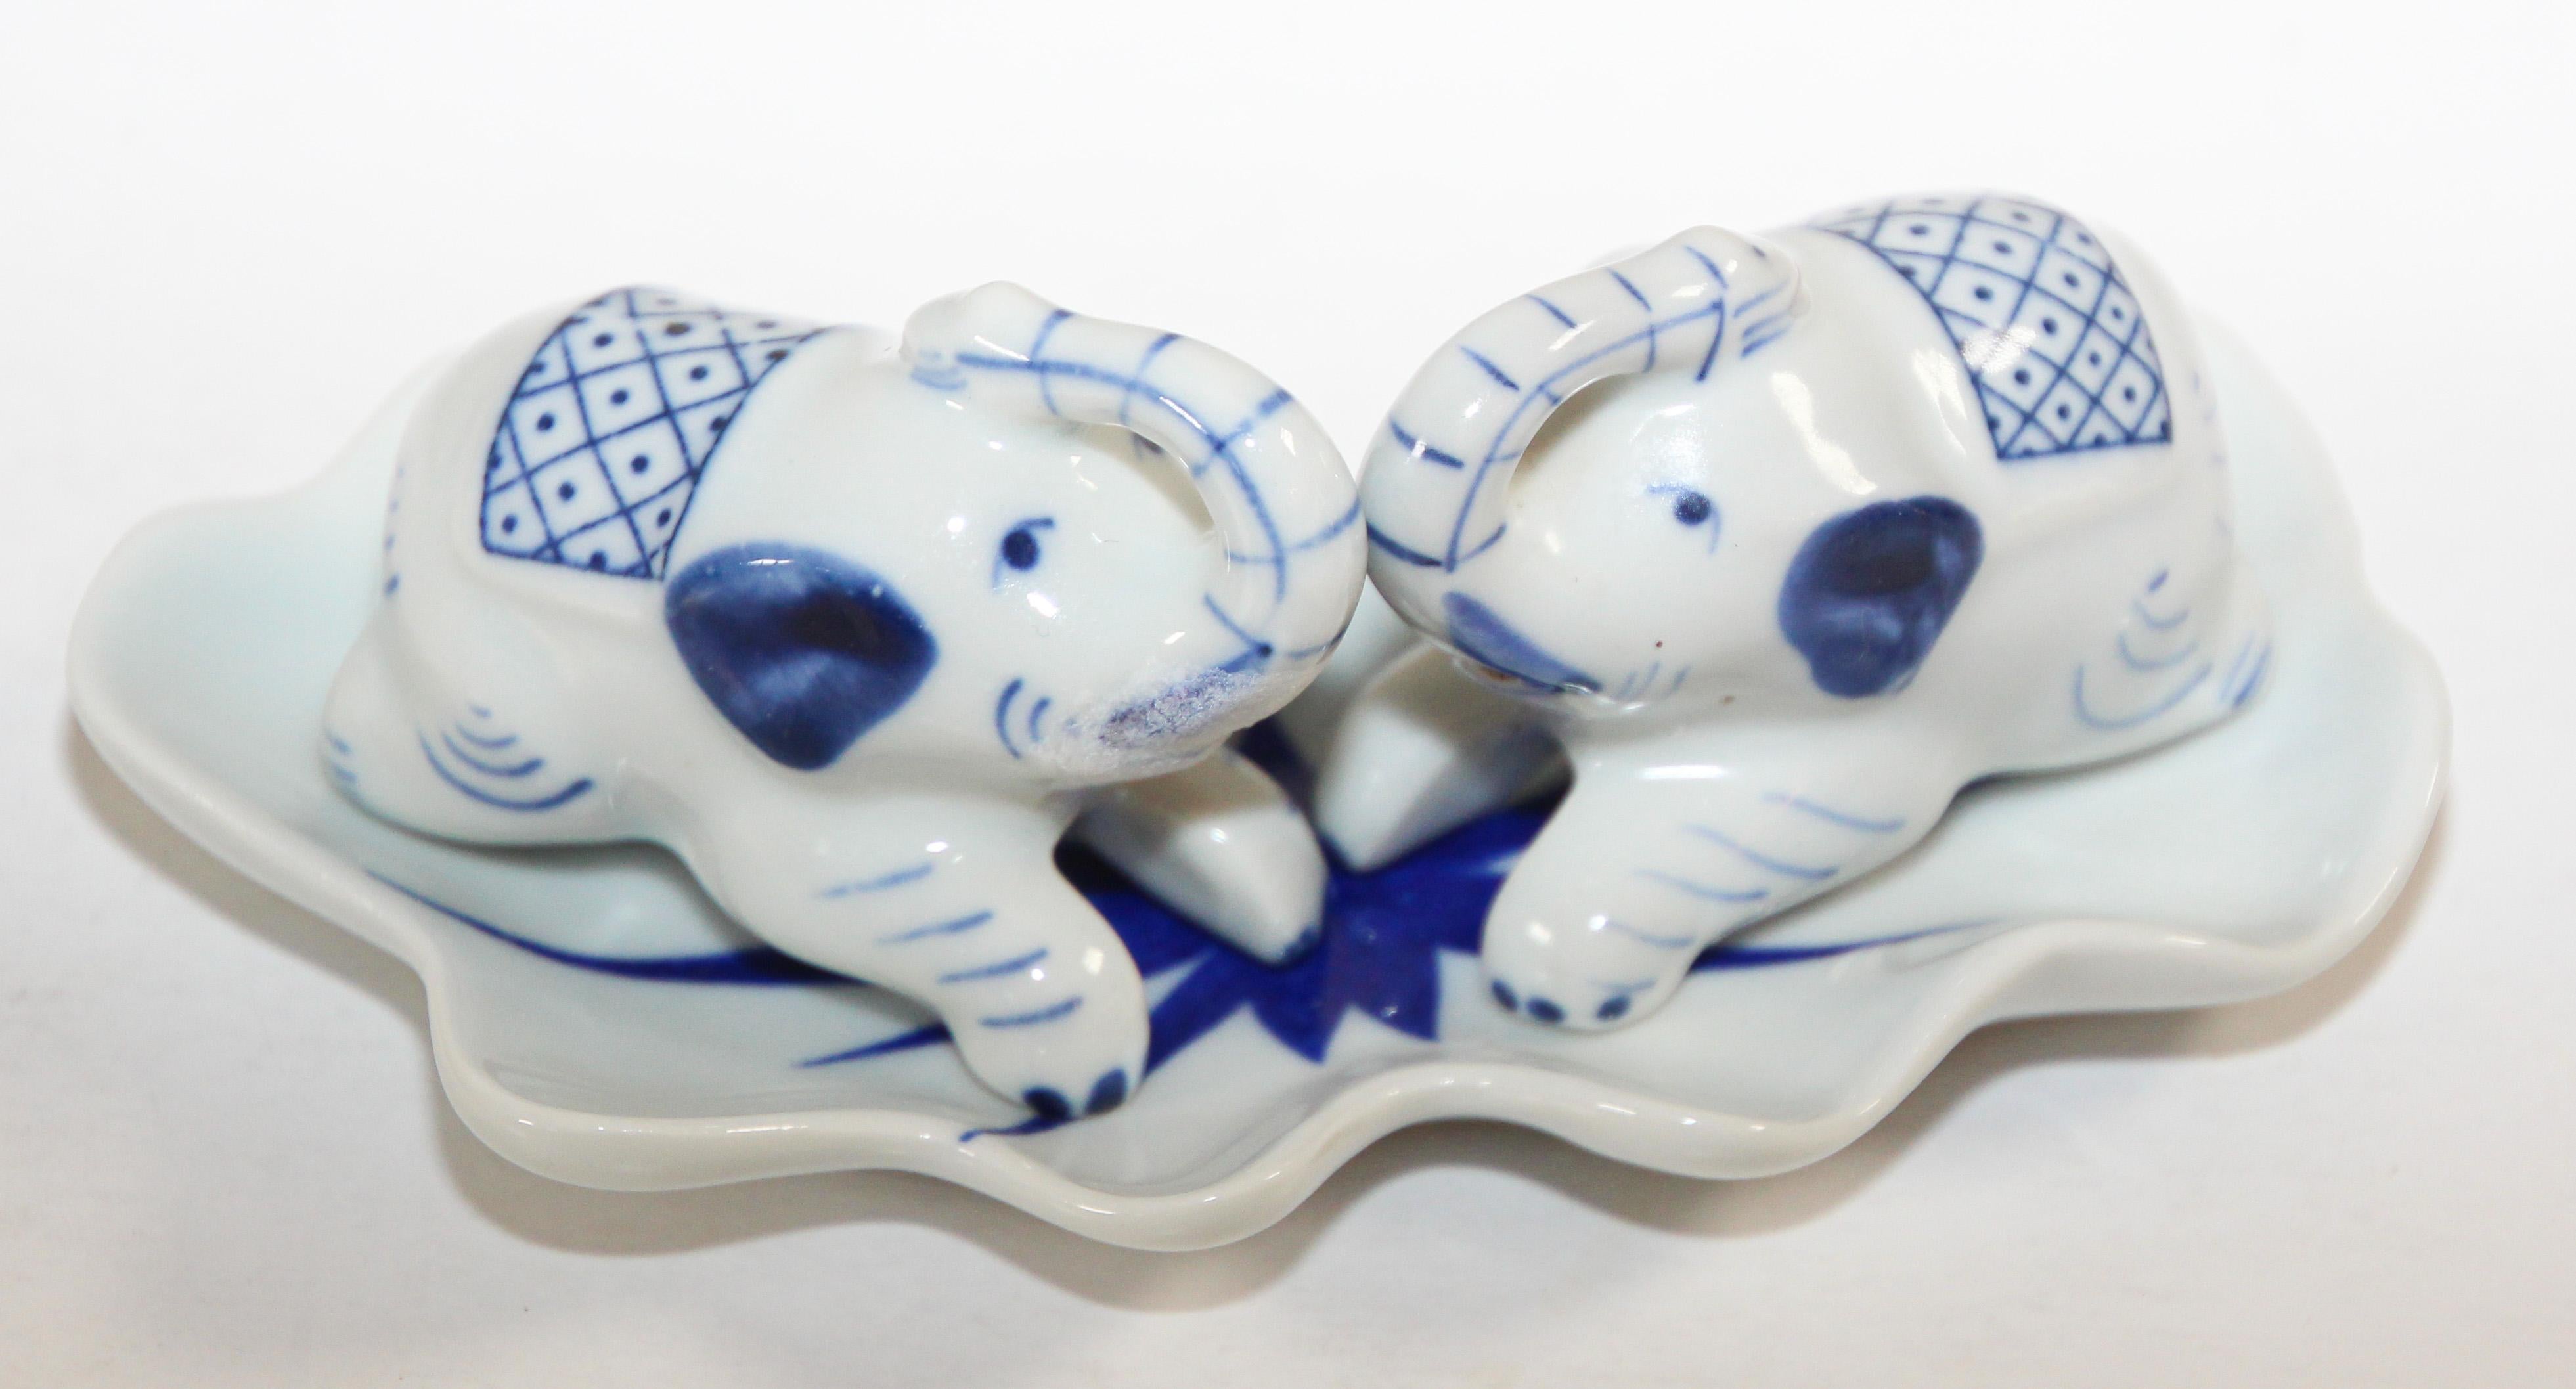 20th Century Vintage Porcelain Elephants Salt and Pepper Shakers with Tray Collectible For Sale